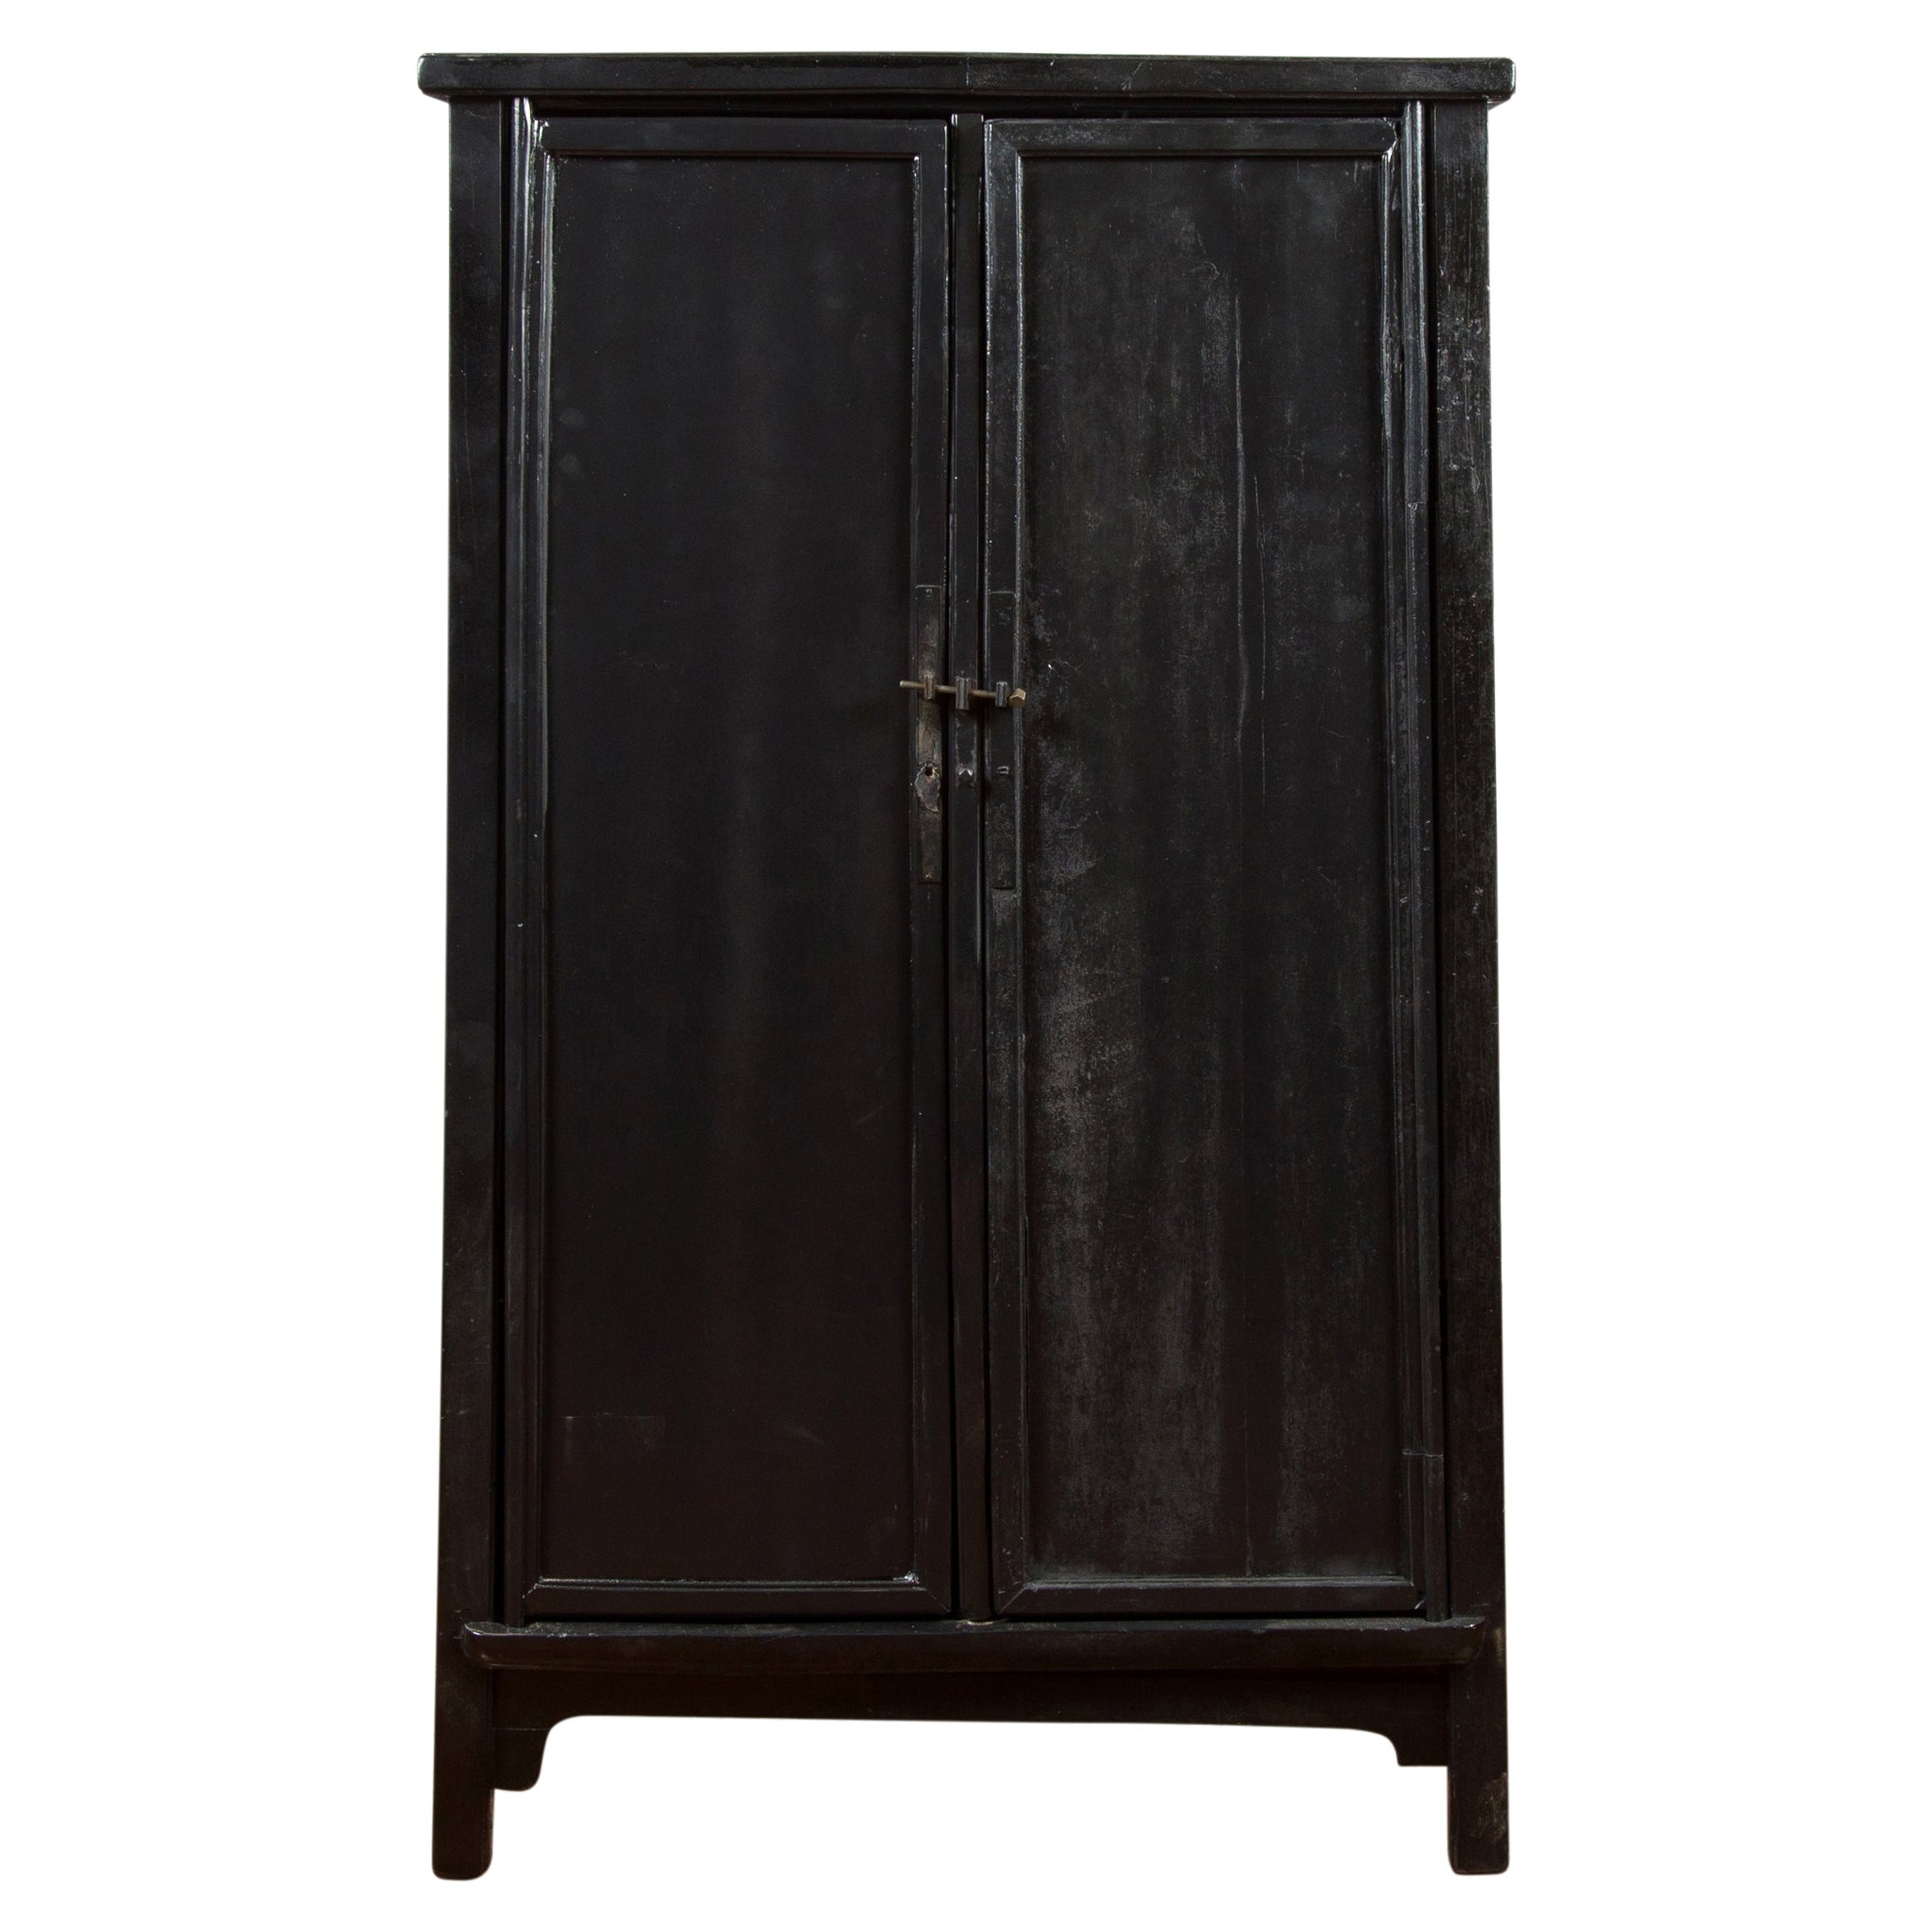 Chinese Vintage Small Cabinet with Tapered Lines and Black Patina